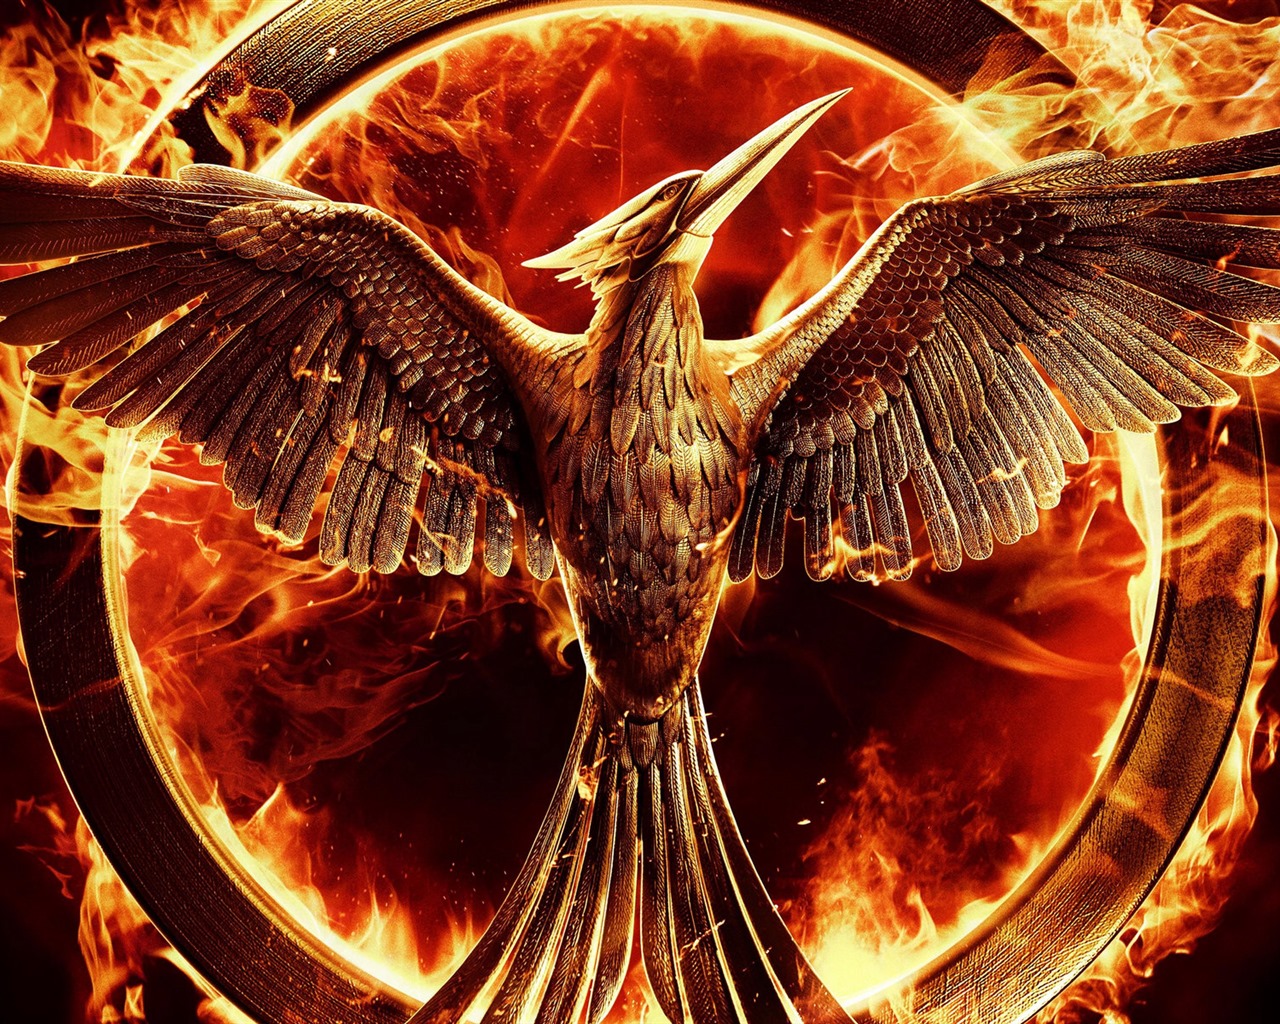 The Hunger Games: Mockingjay HD wallpapers #4 - 1280x1024